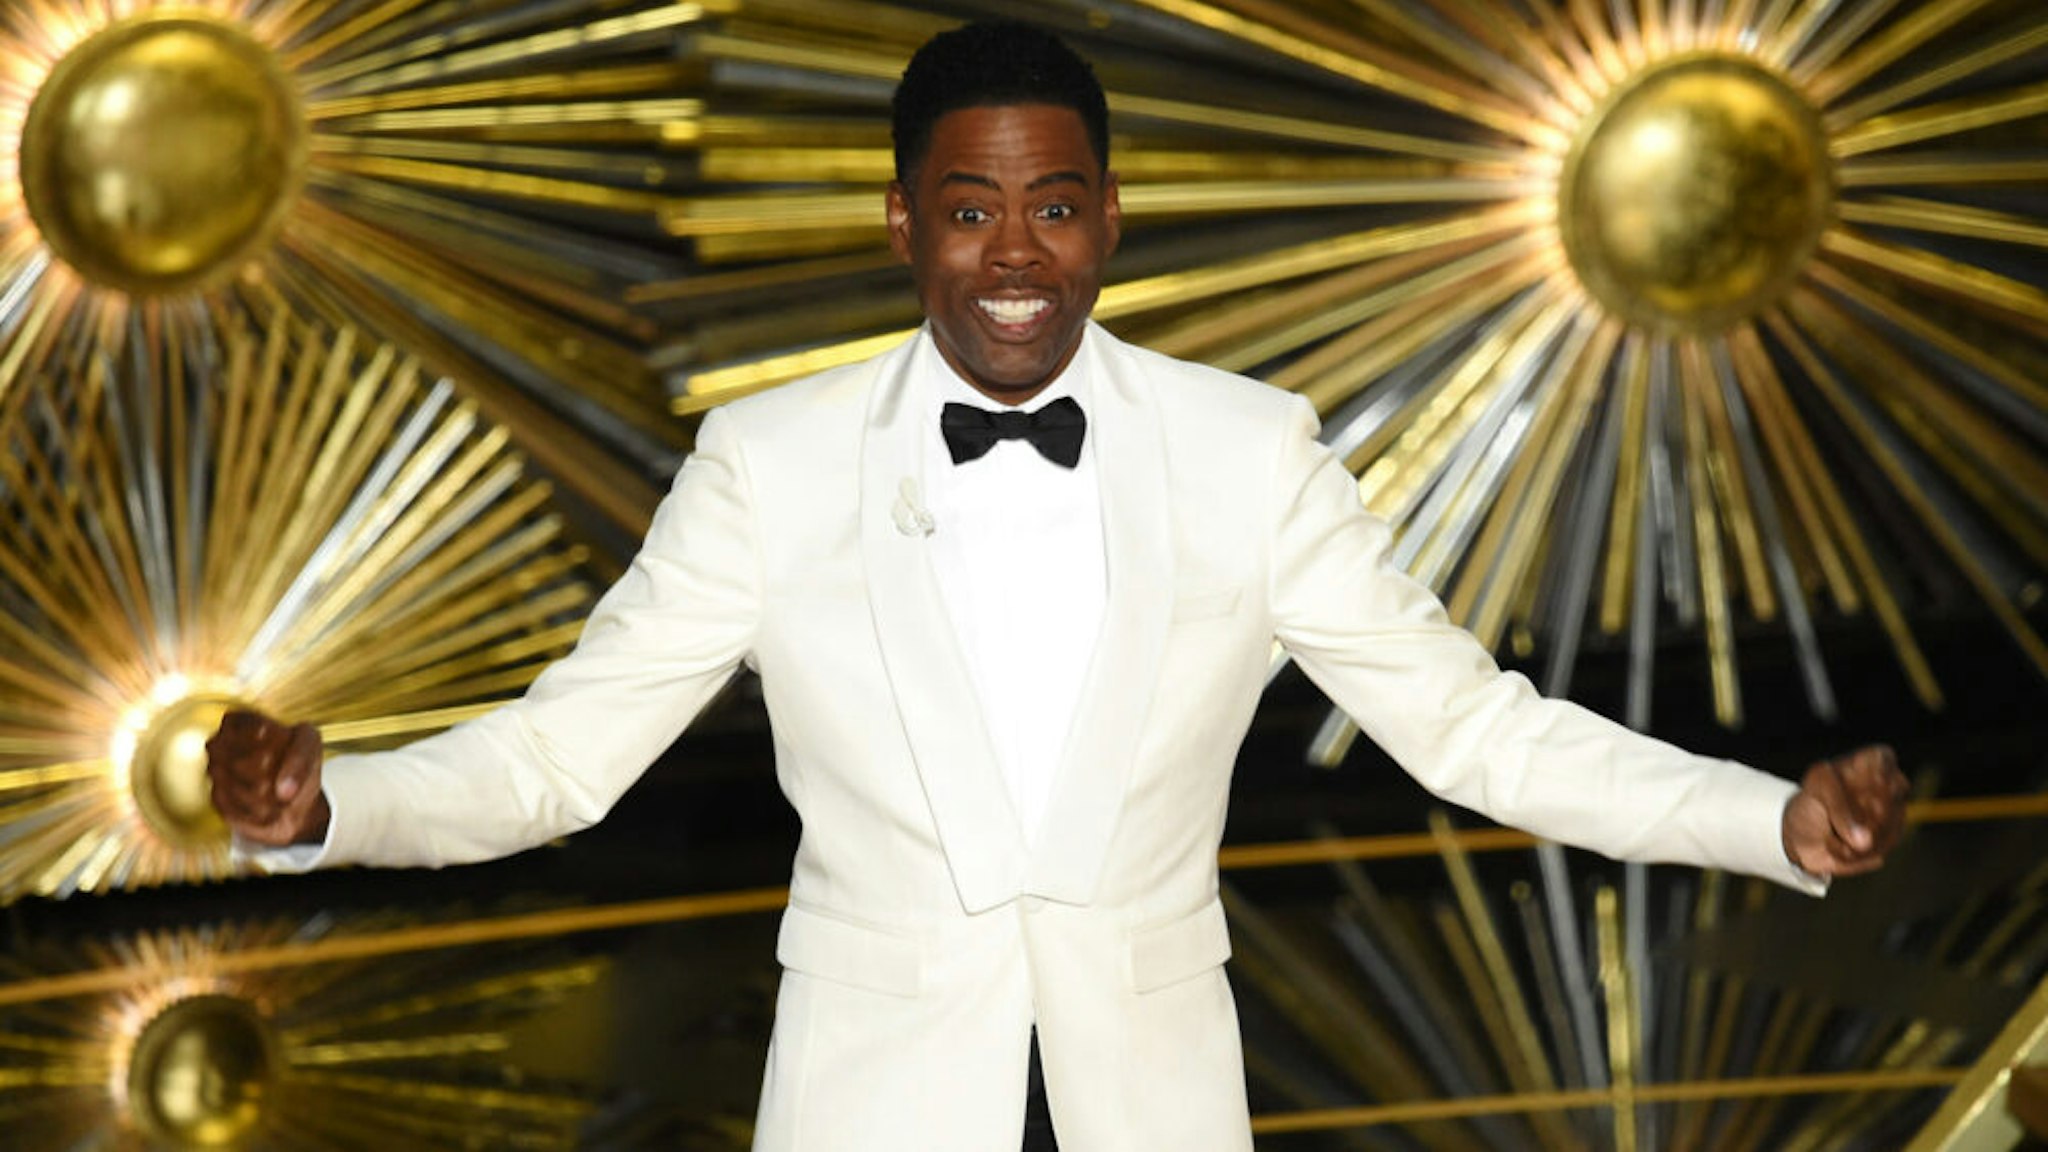 HOLLYWOOD, CA - FEBRUARY 28: Host Chris Rock speaks onstage during the 88th Annual Academy Awards at the Dolby Theatre on February 28, 2016 in Hollywood, California.